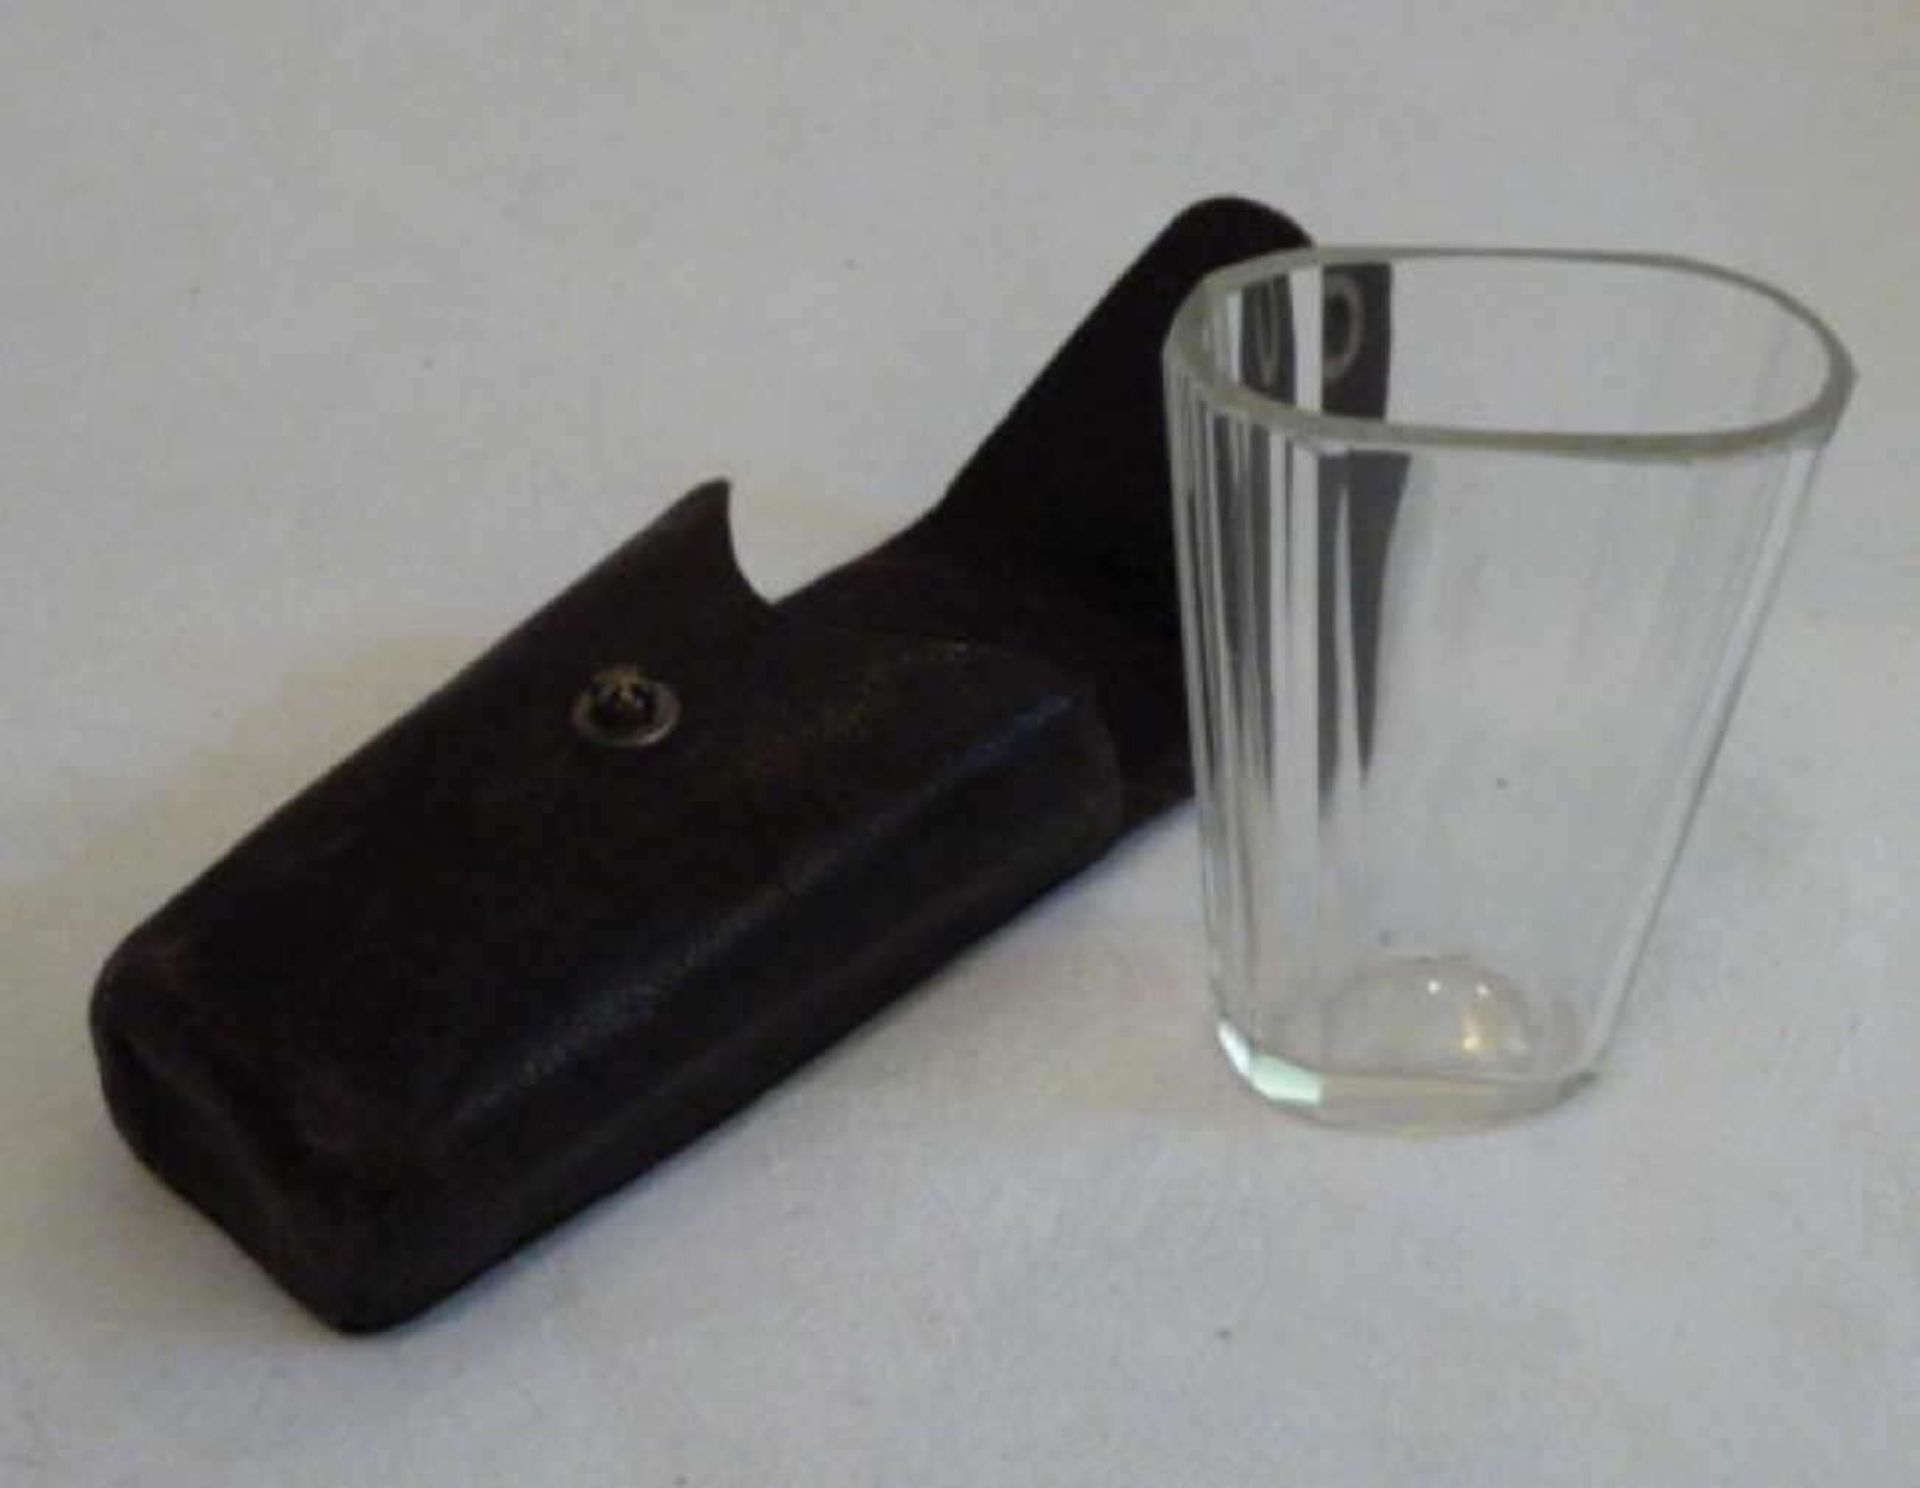 1 Biedermair drinking glass in leather case. Very good condition, height c.a 8,5cm - Image 2 of 2